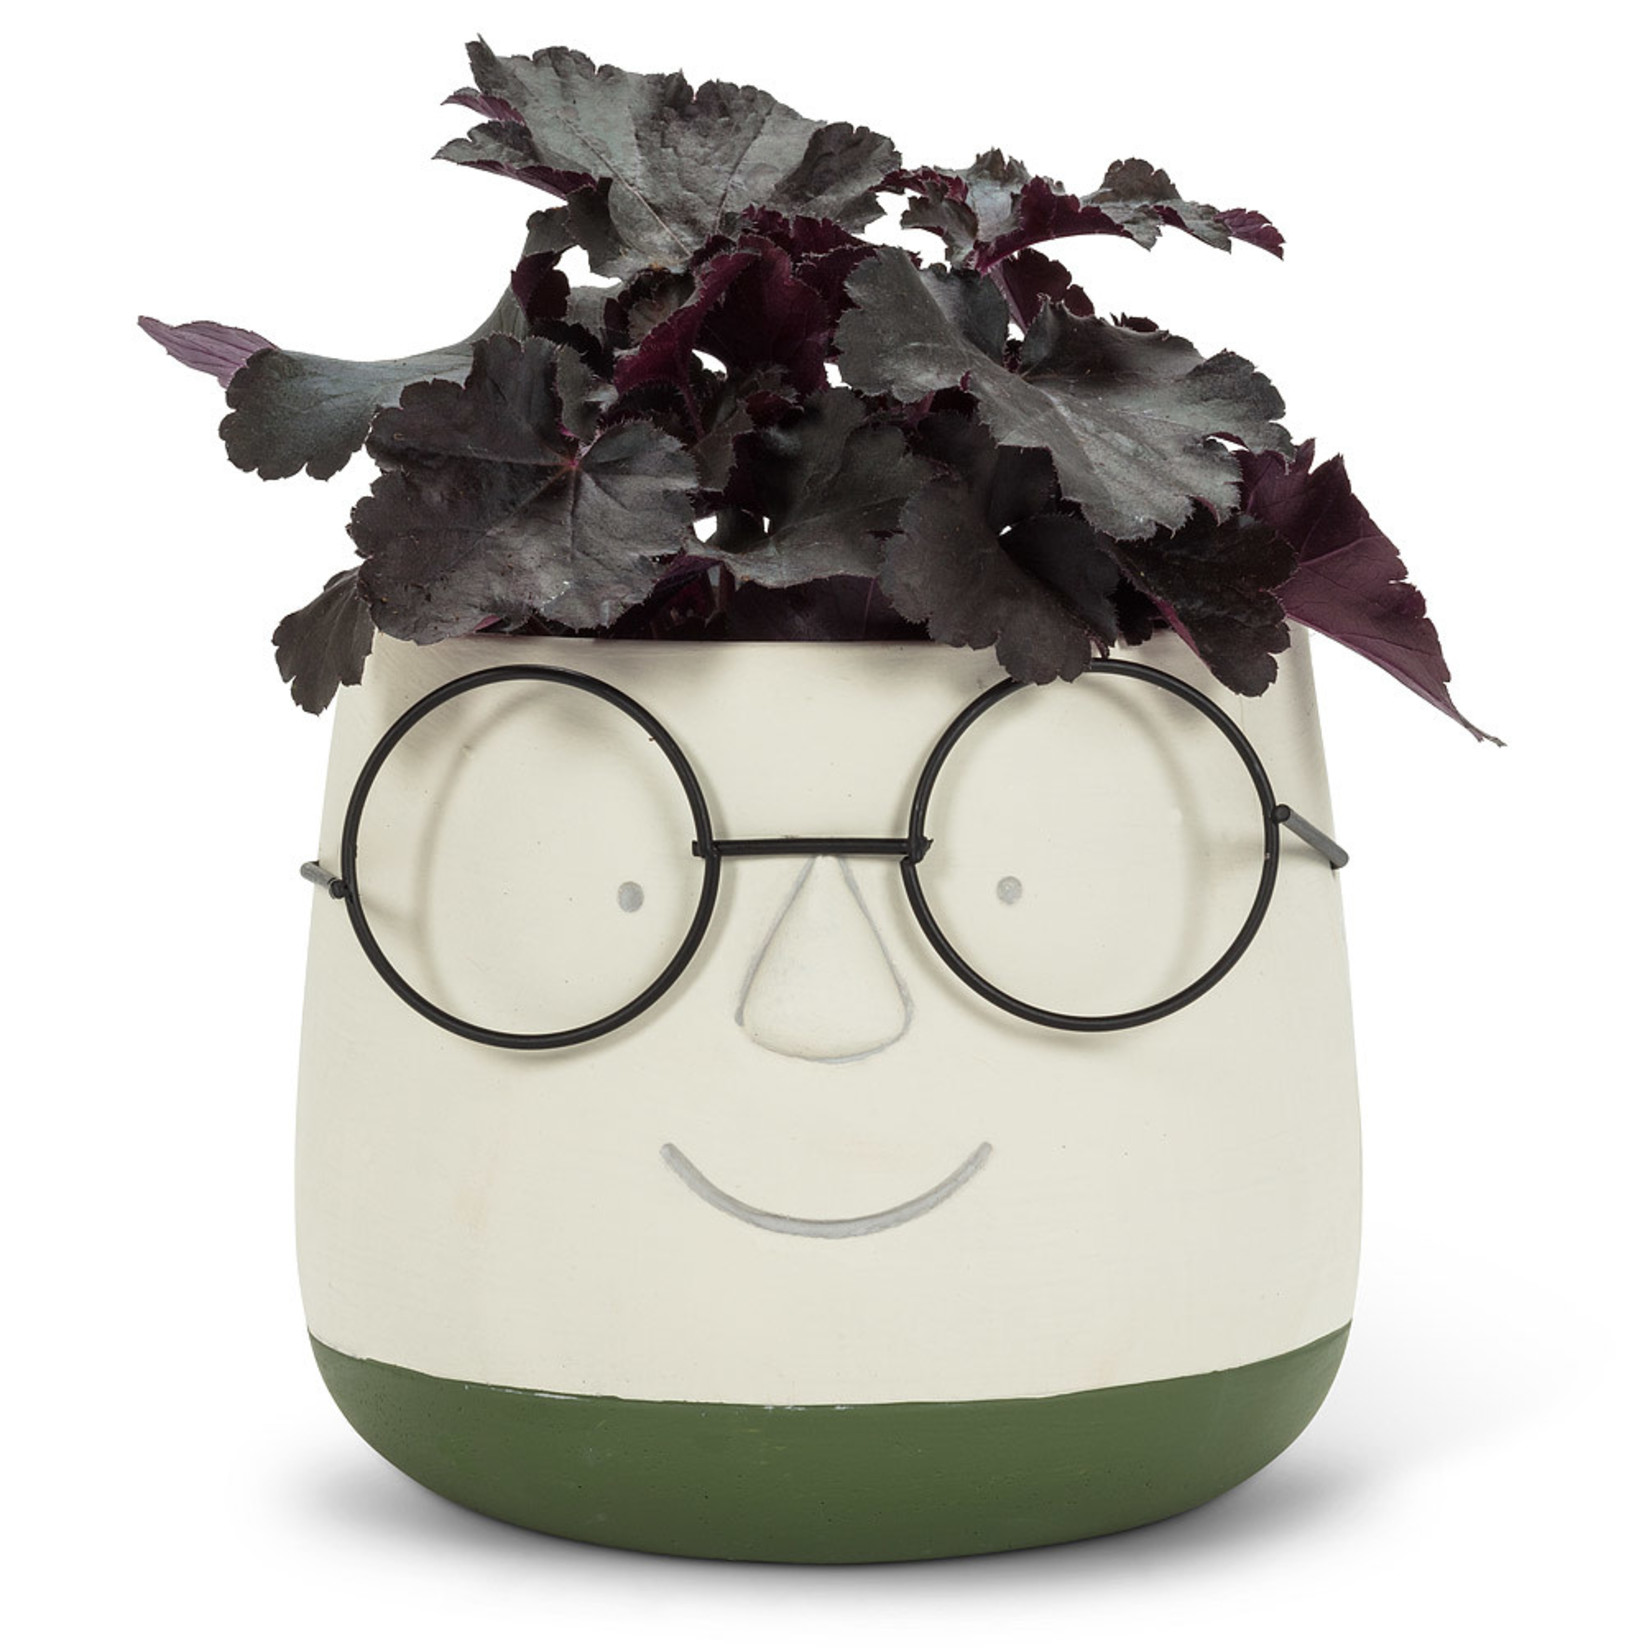 Forpost Trade Face with Glasses Planter - 6"